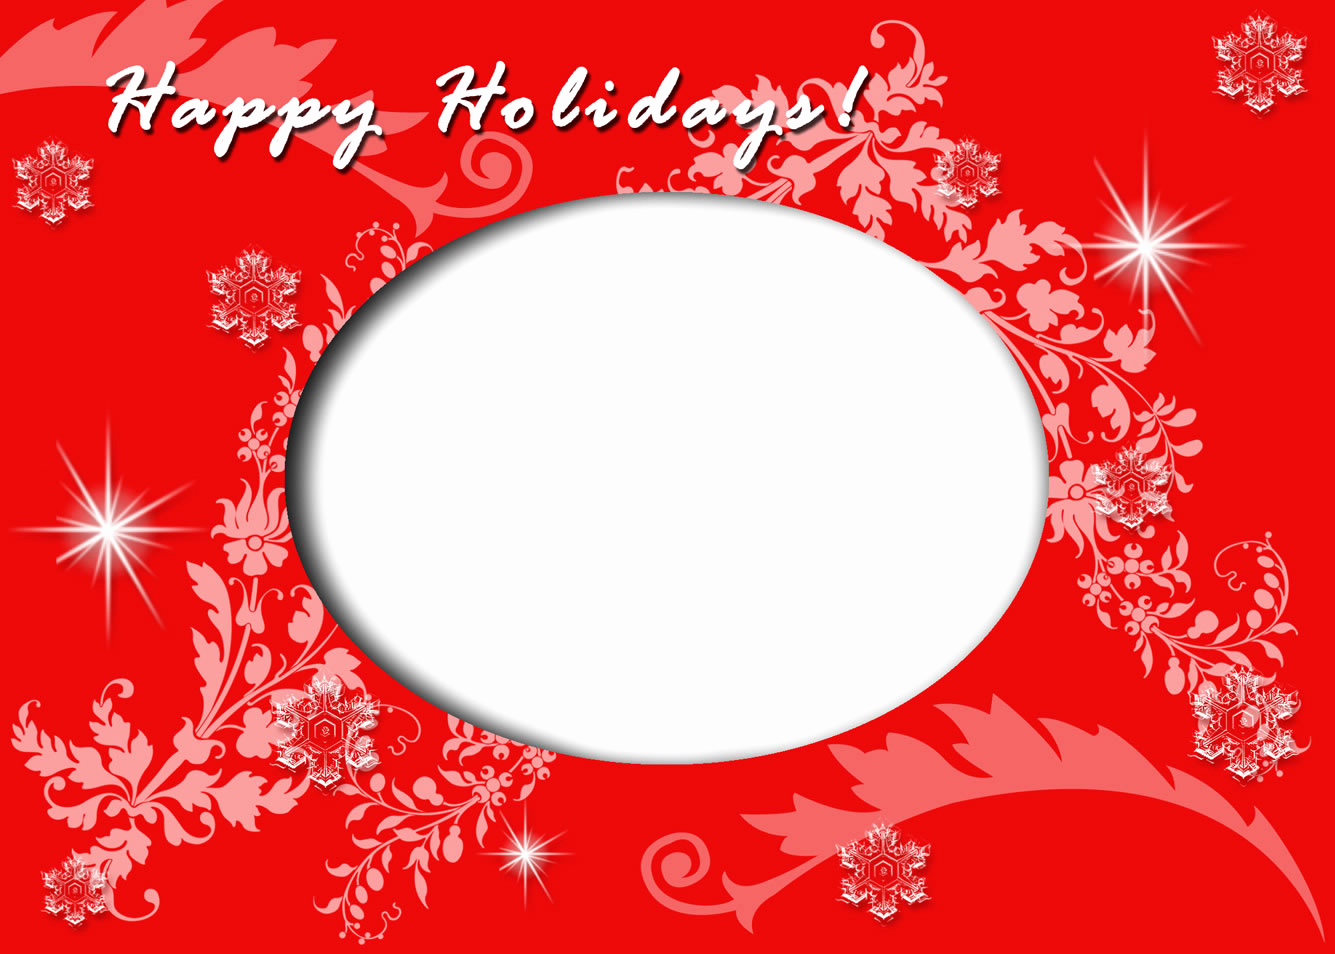 Christmas Card Templates for Photoshop Best Of Christmas Card Templates